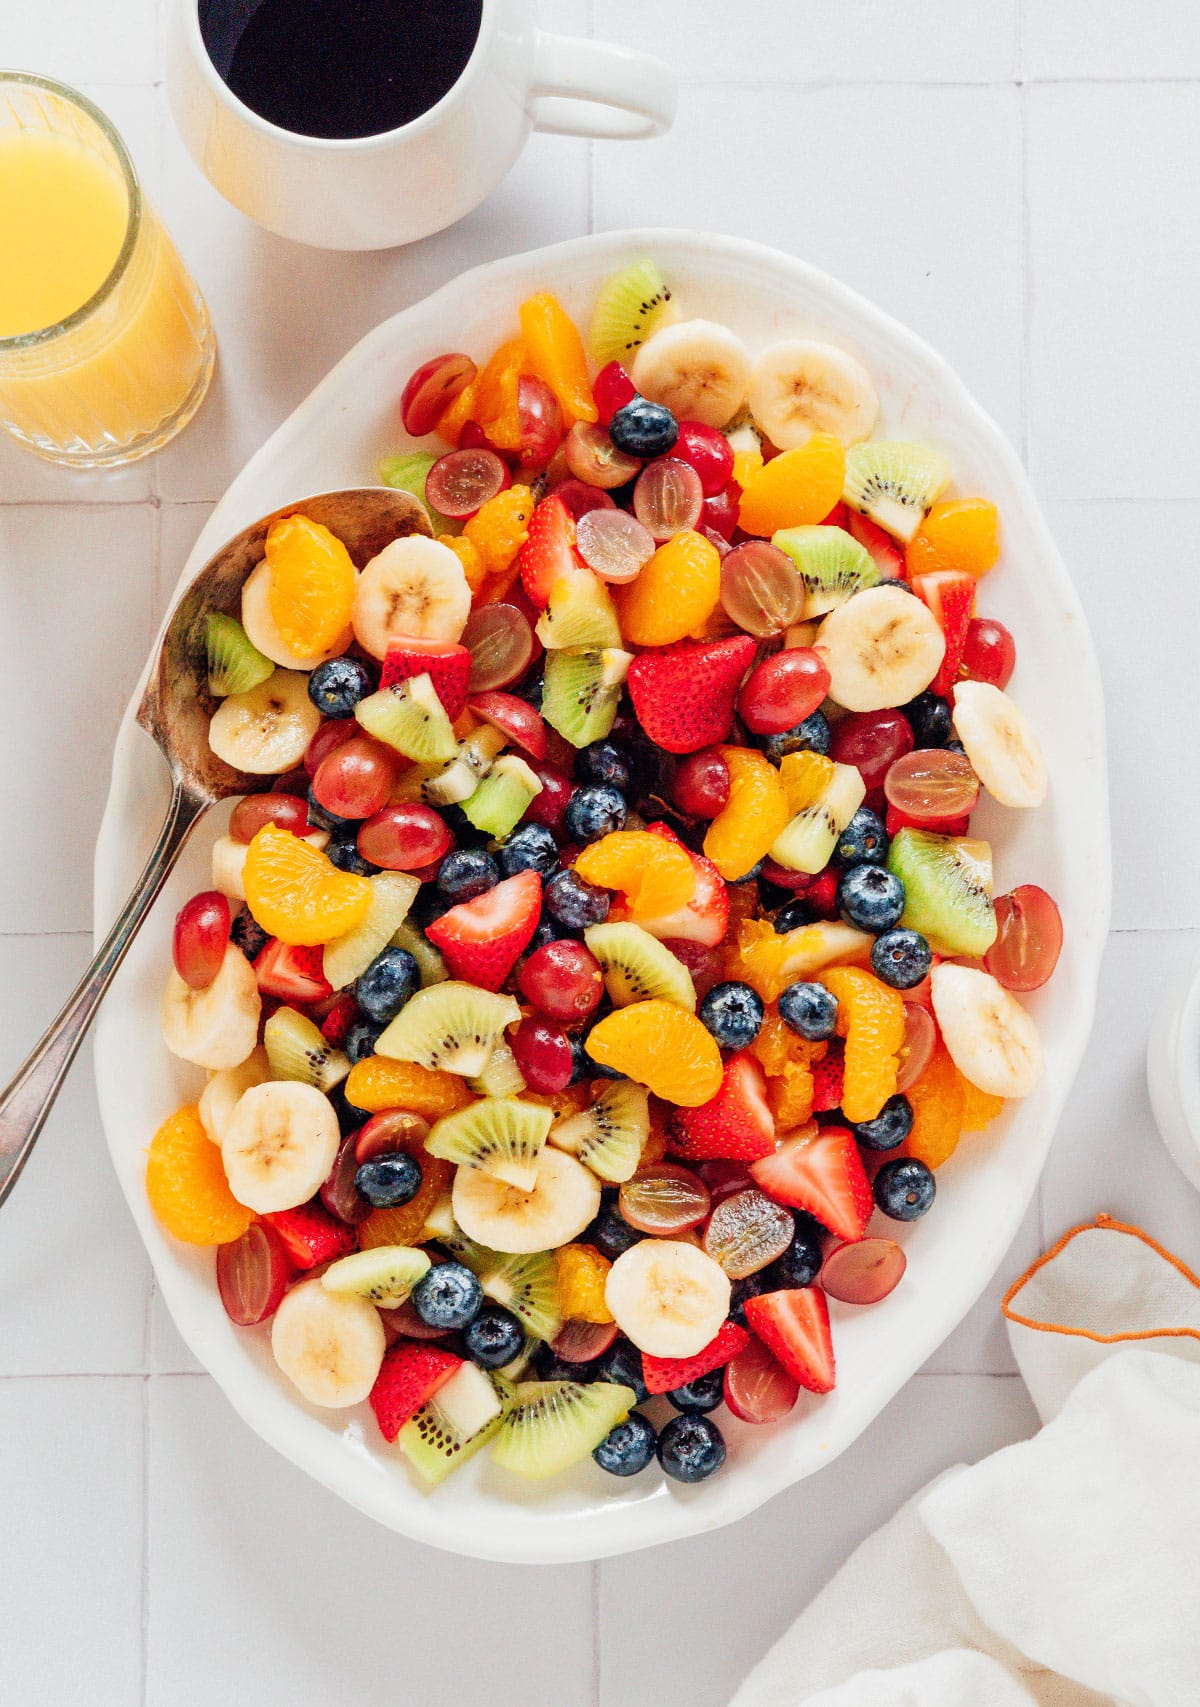 Breakfast fruit salad in a large white bowl with a glass of orange juice and coffee mug nearby.